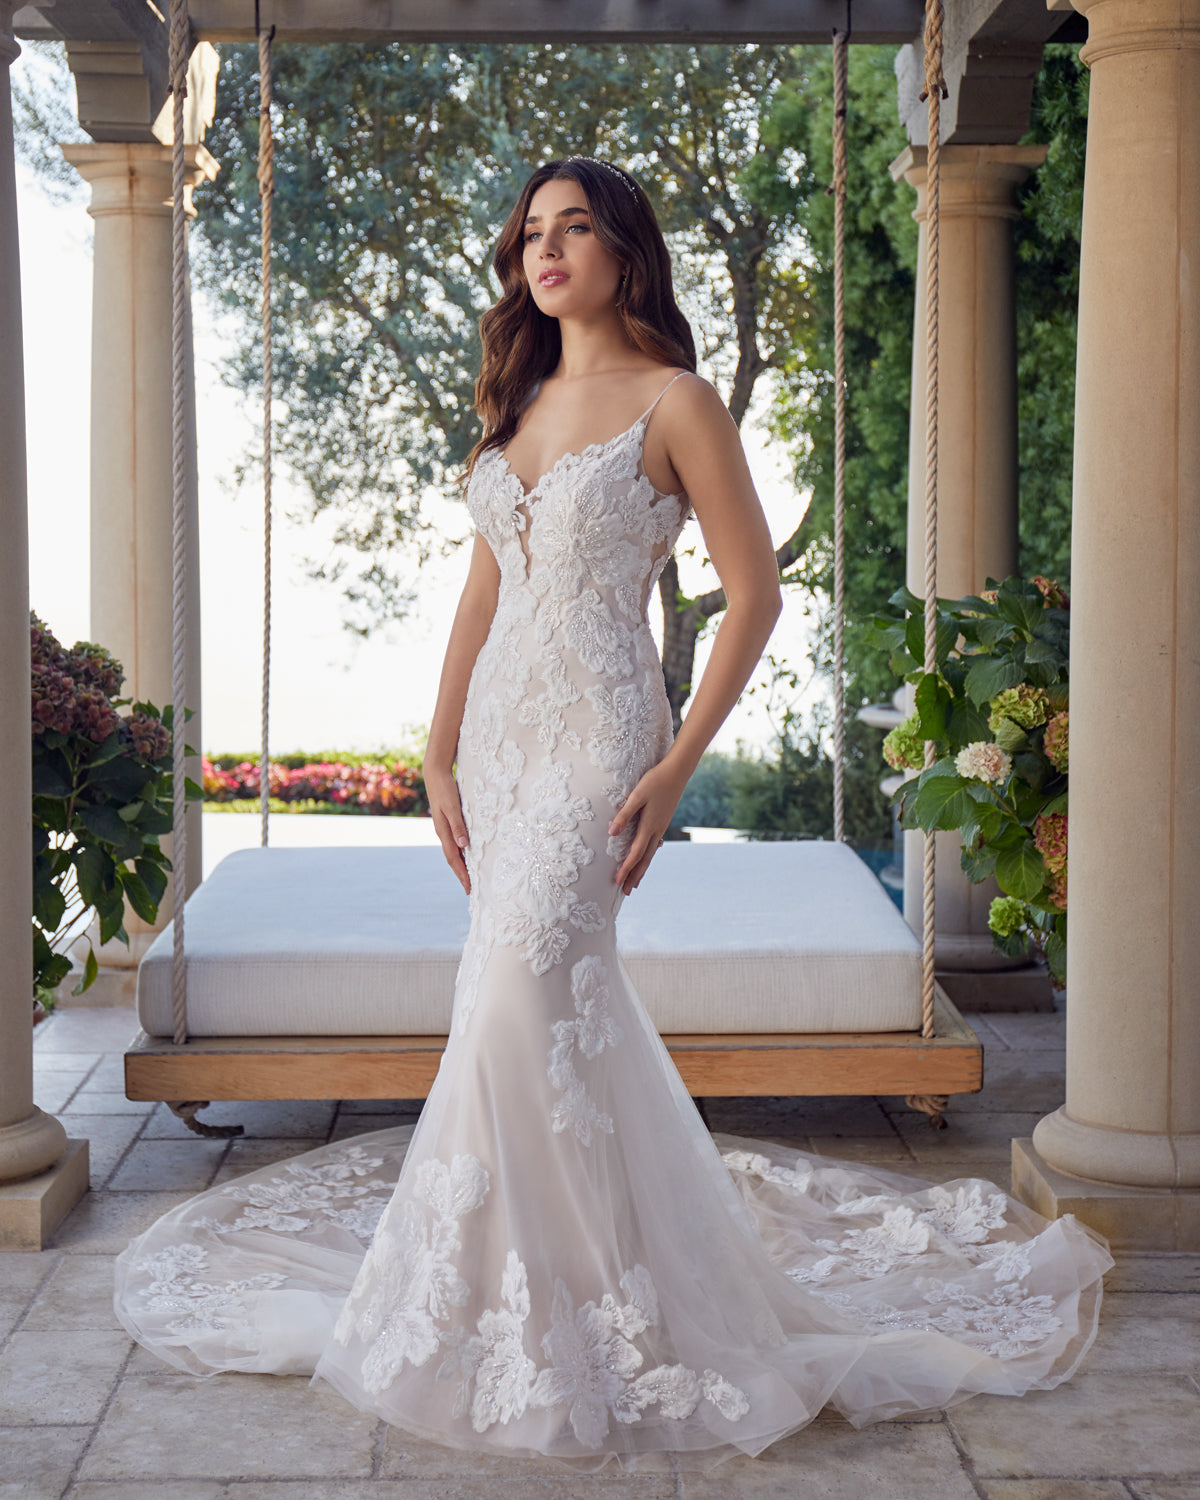 Casablanca bridal 2447 beaded floral lace fitted v neckline royal length train.